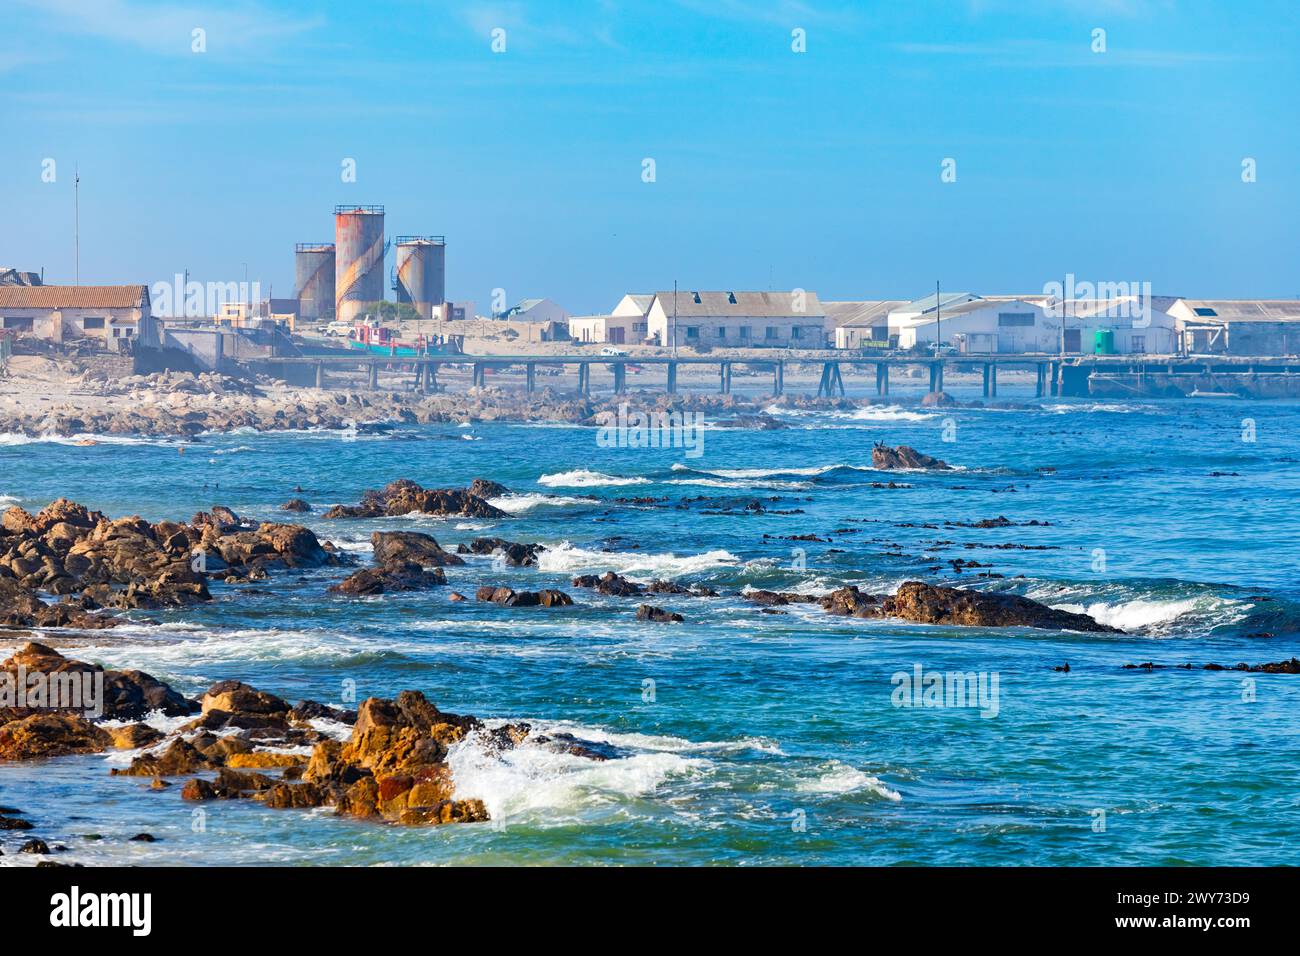 Shoreline scene in small West Coast town of Port Nolloth, South Africa Stock Photo